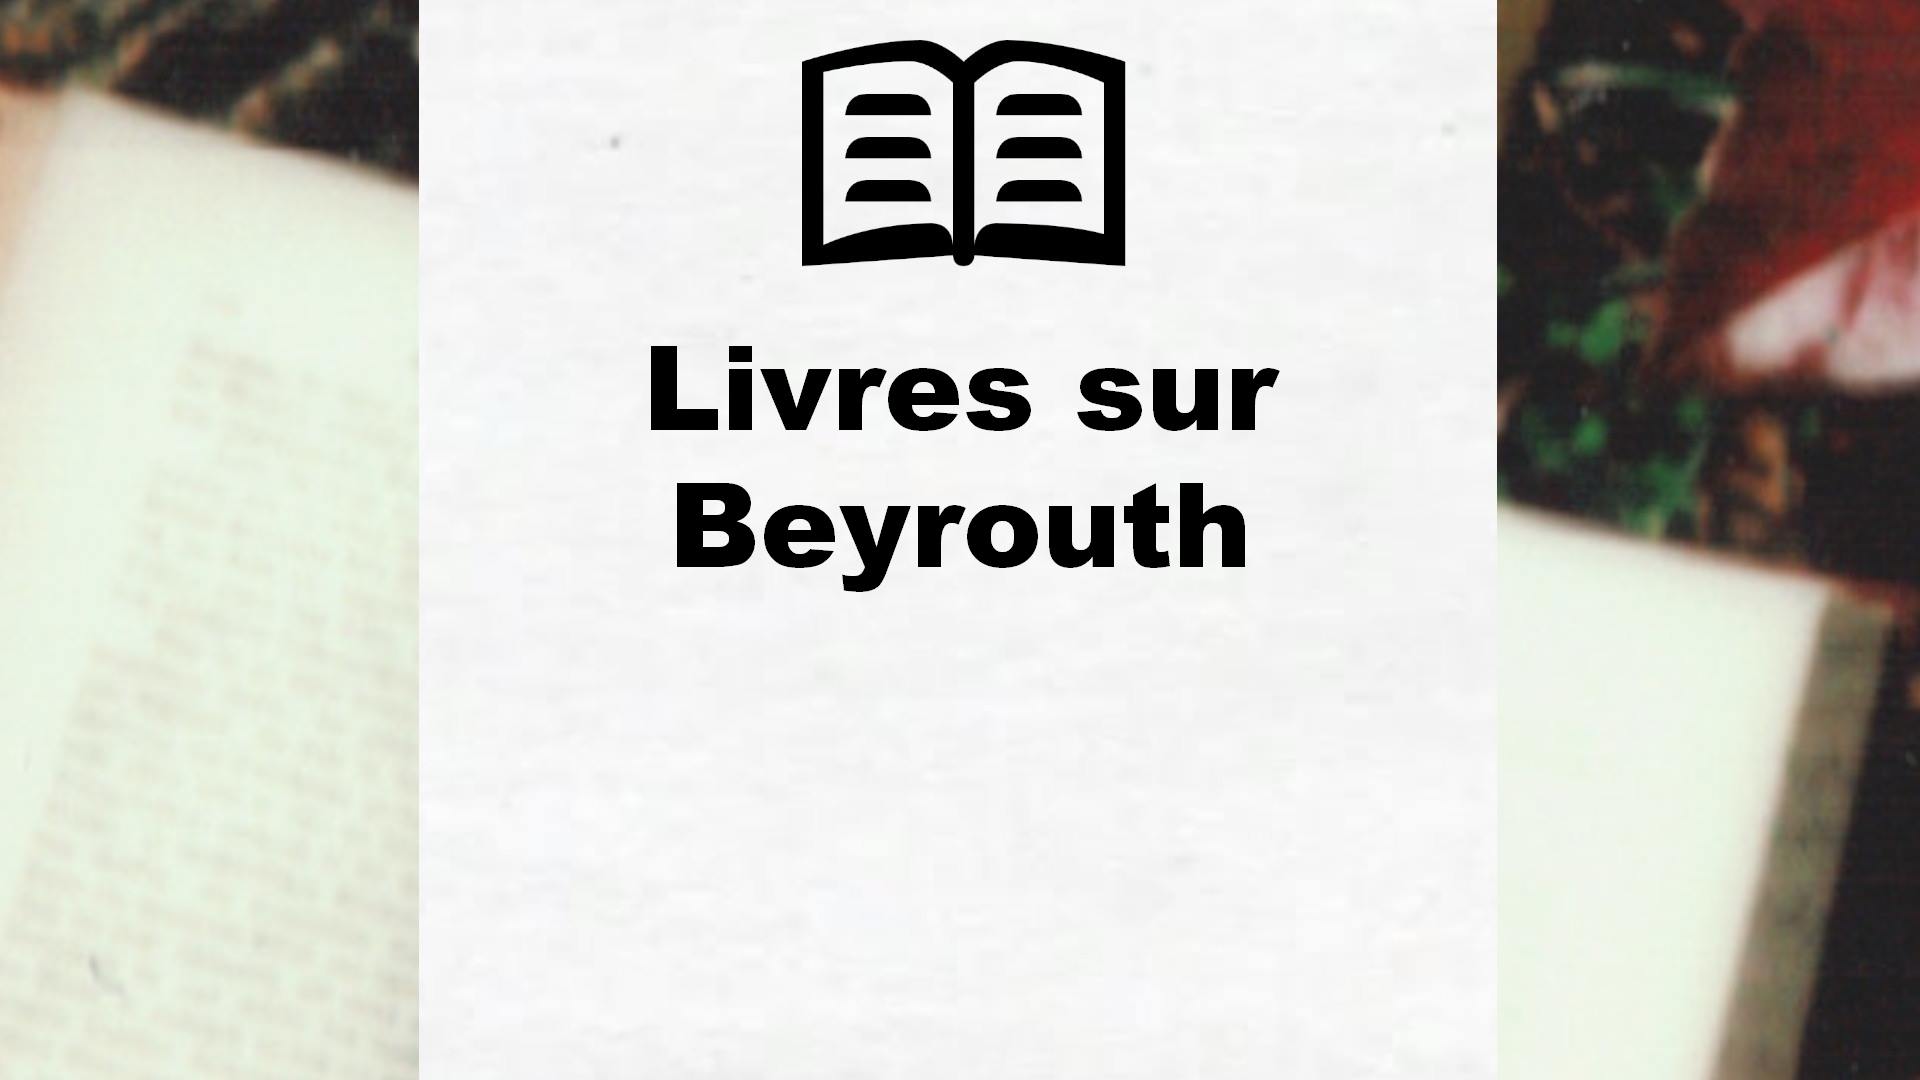 Livres sur Beyrouth